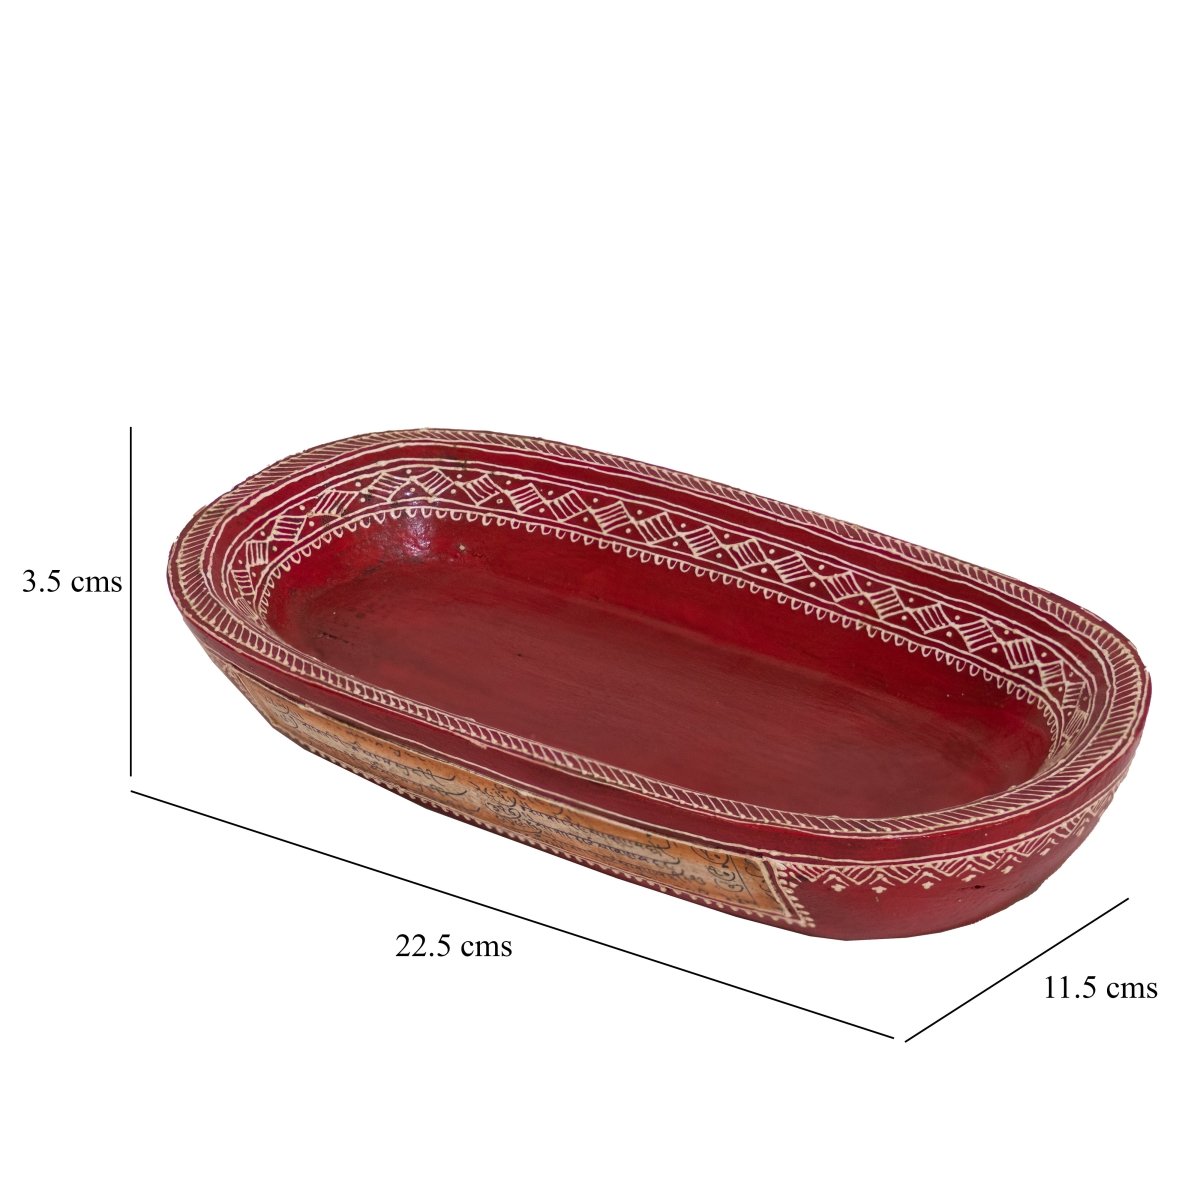 Kezevel Wooden Decorative Tray - Oval Red White Handcrafted Natural Mango Wood Small Tray for Decor, Storage Tray Puja Tray